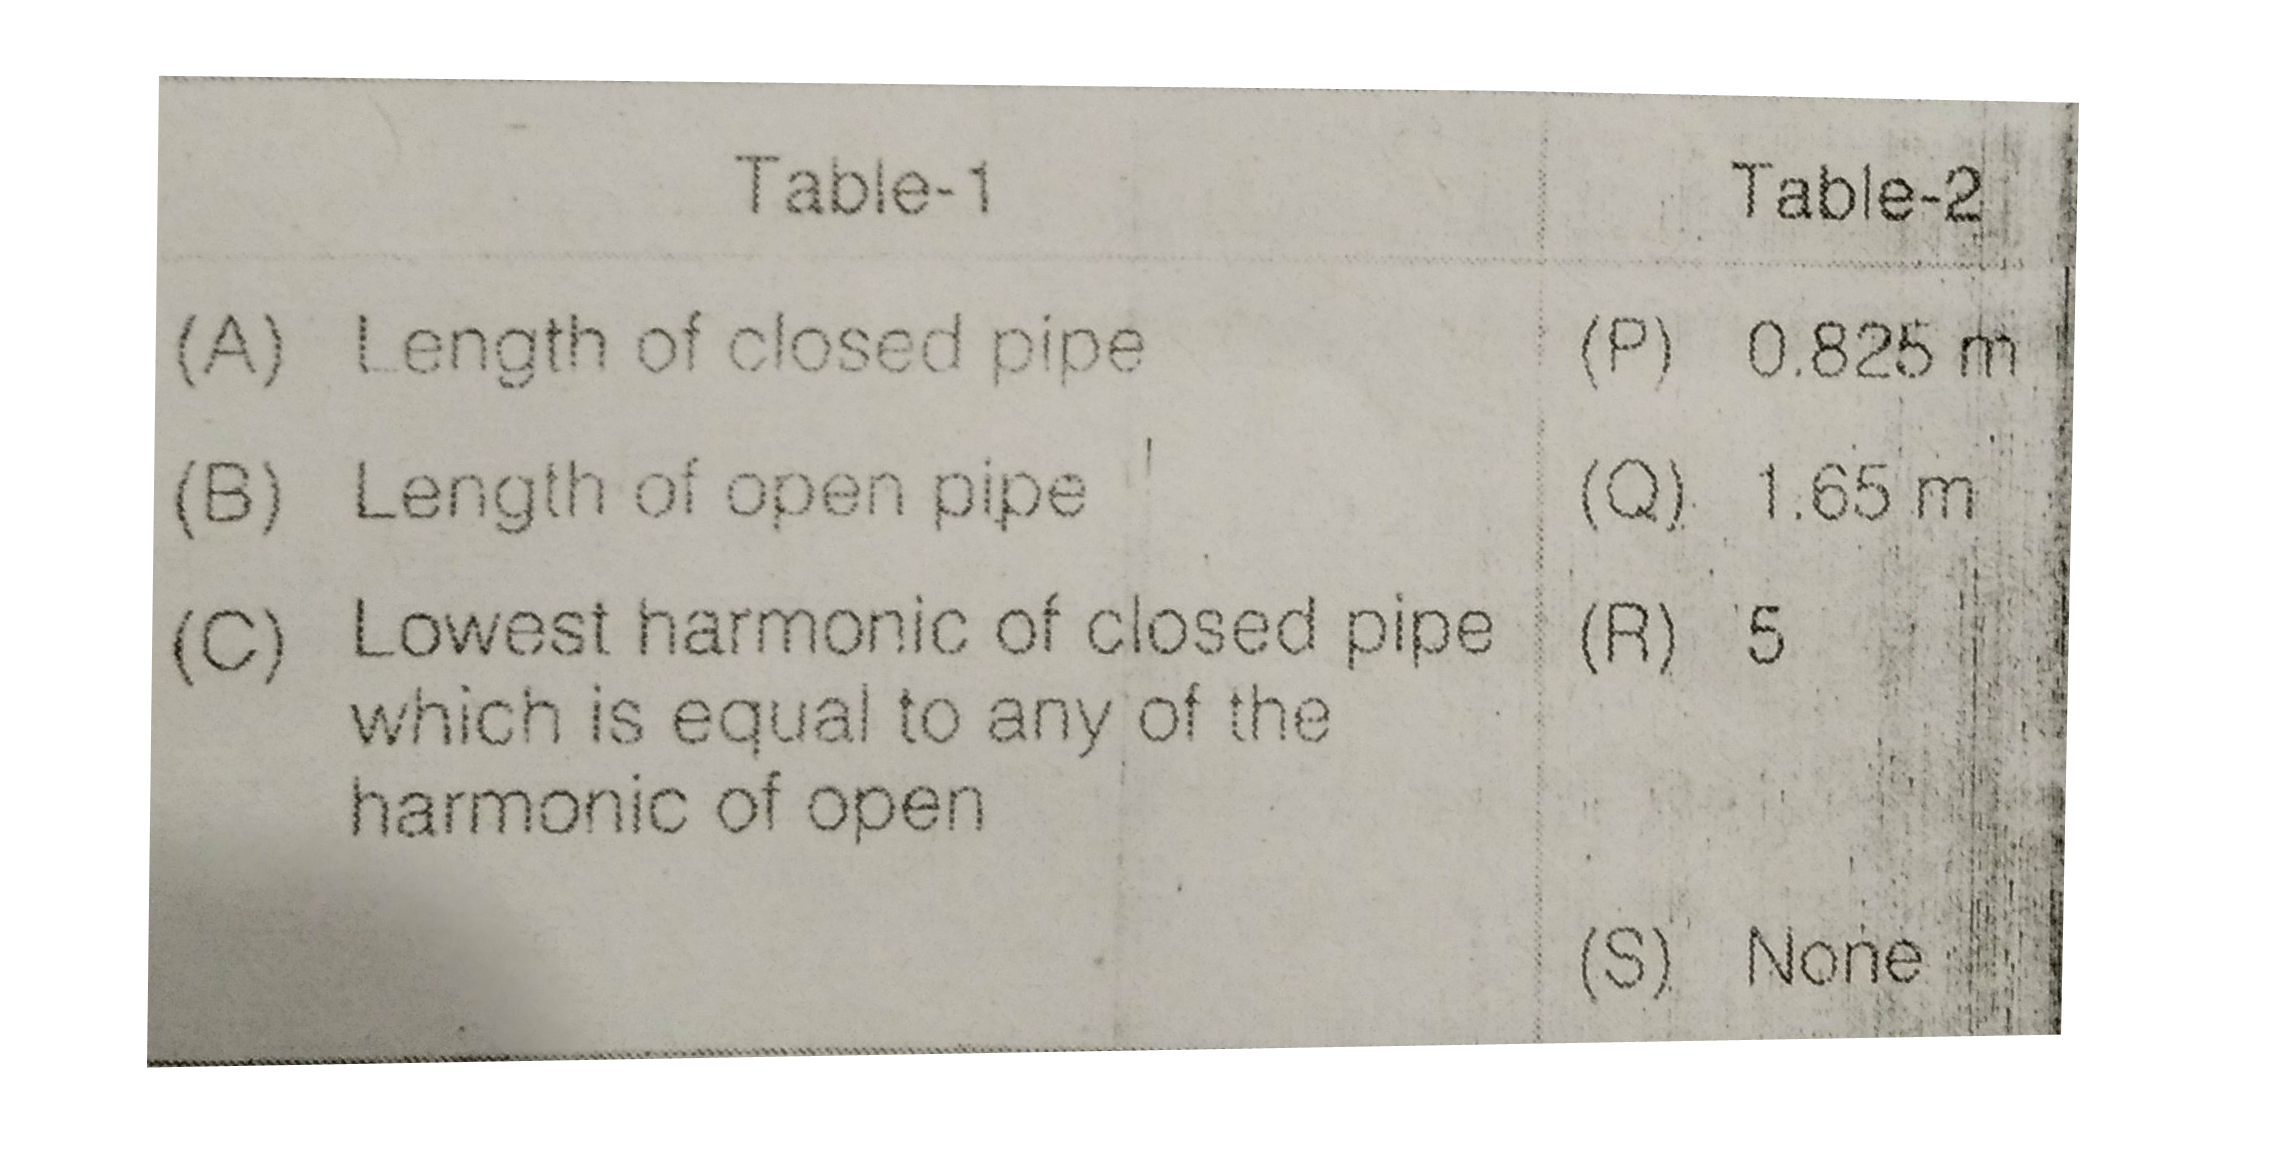 Fundamental frequency of a closed of a pipe is 100 and that of an open pipe is 200 Hz. Match following (V(s) = 330m//s)